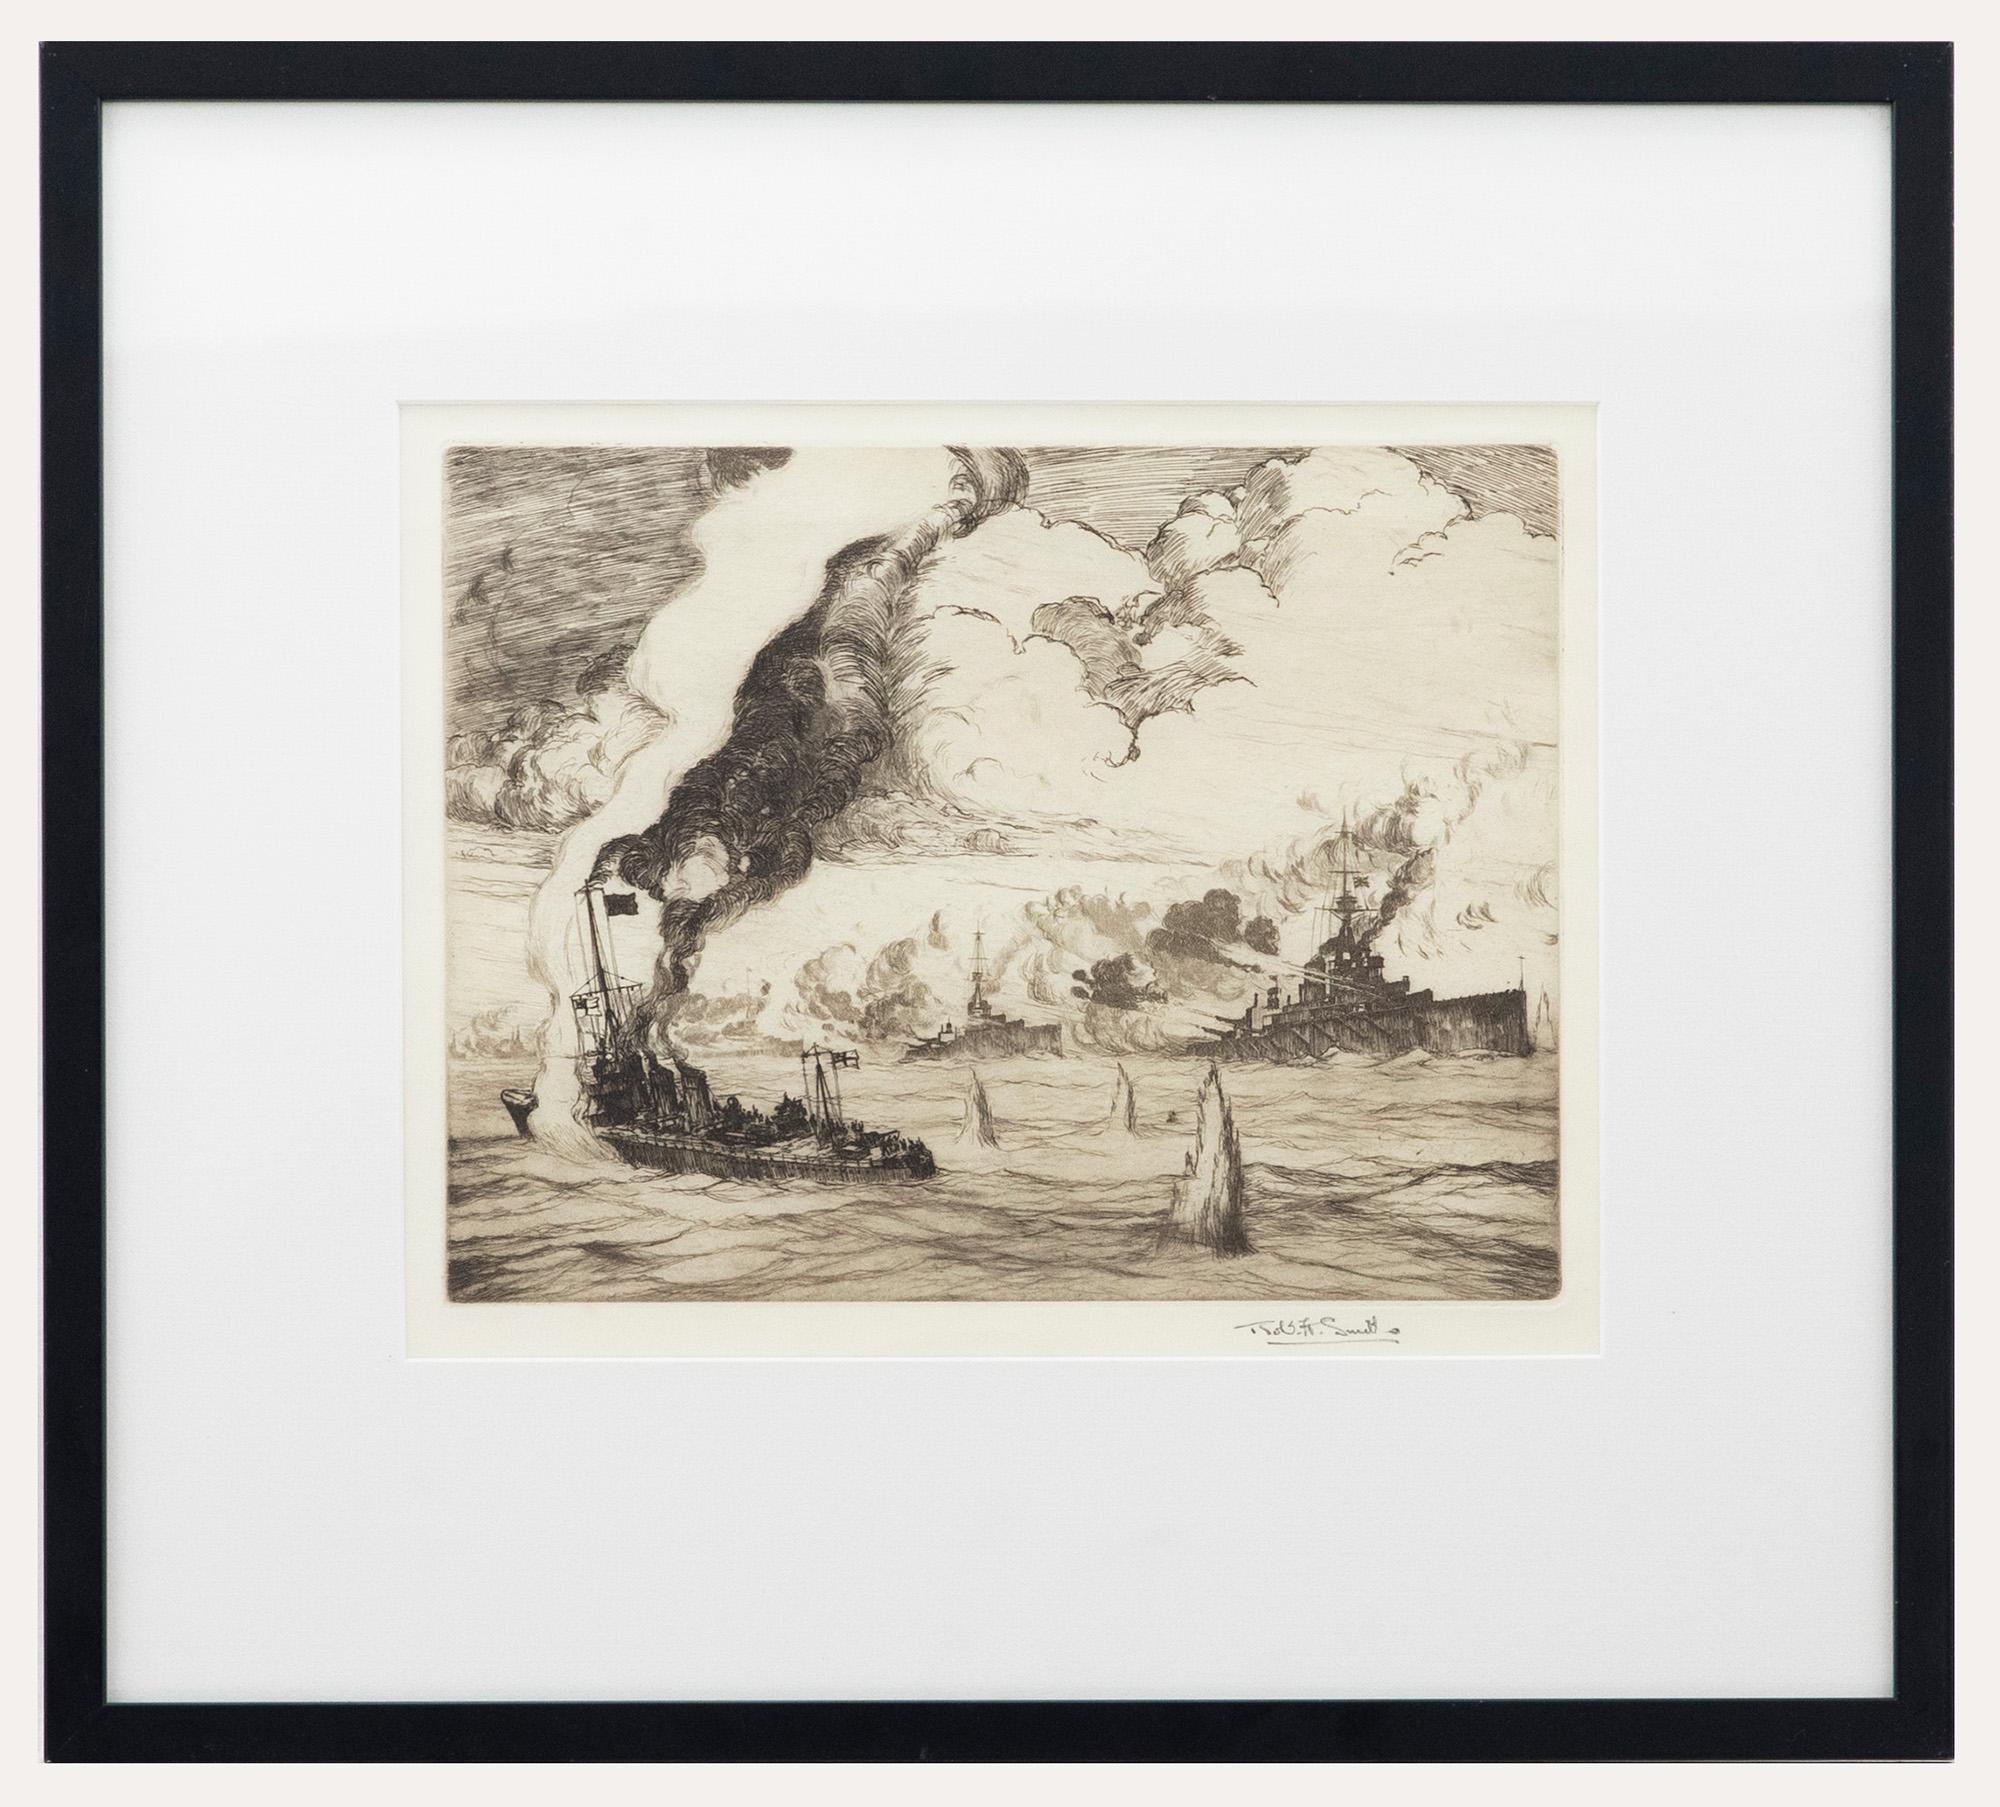 Unknown Figurative Print - Robert Henry Smith (fl.1906-1930) - Framed Etching, A Naval Engagement